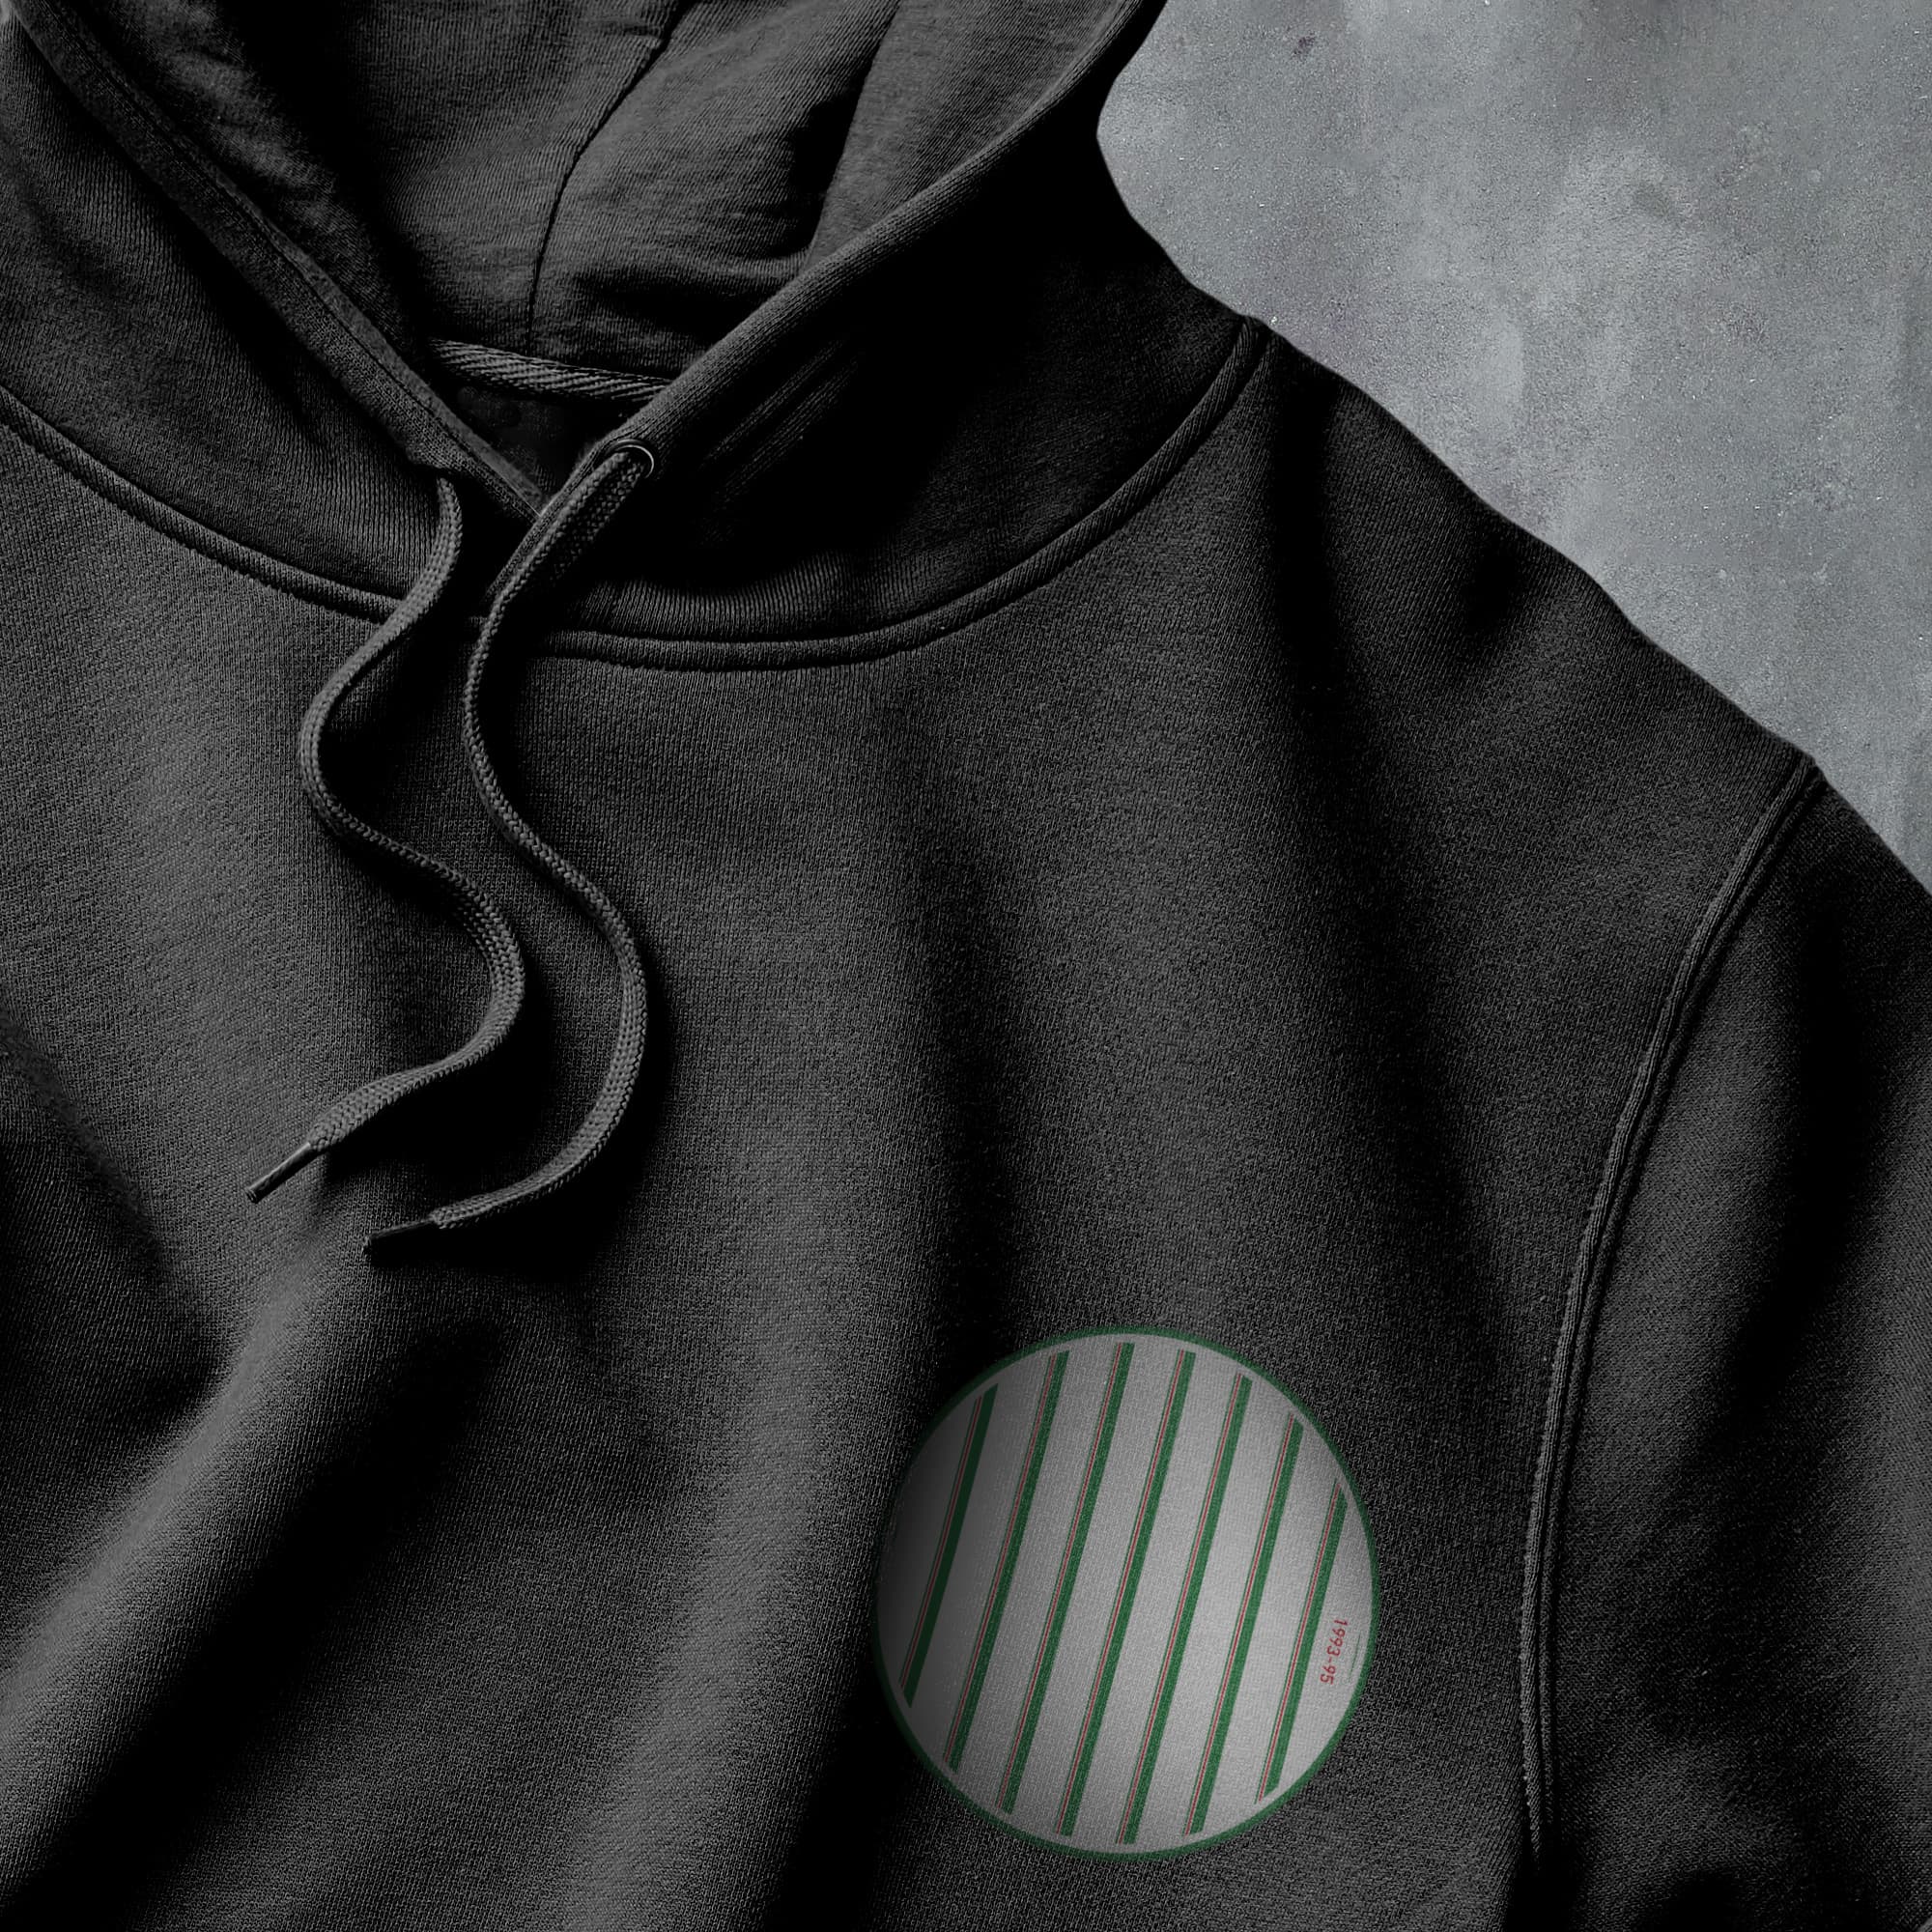 a close up of a black hoodie with a green circle on it